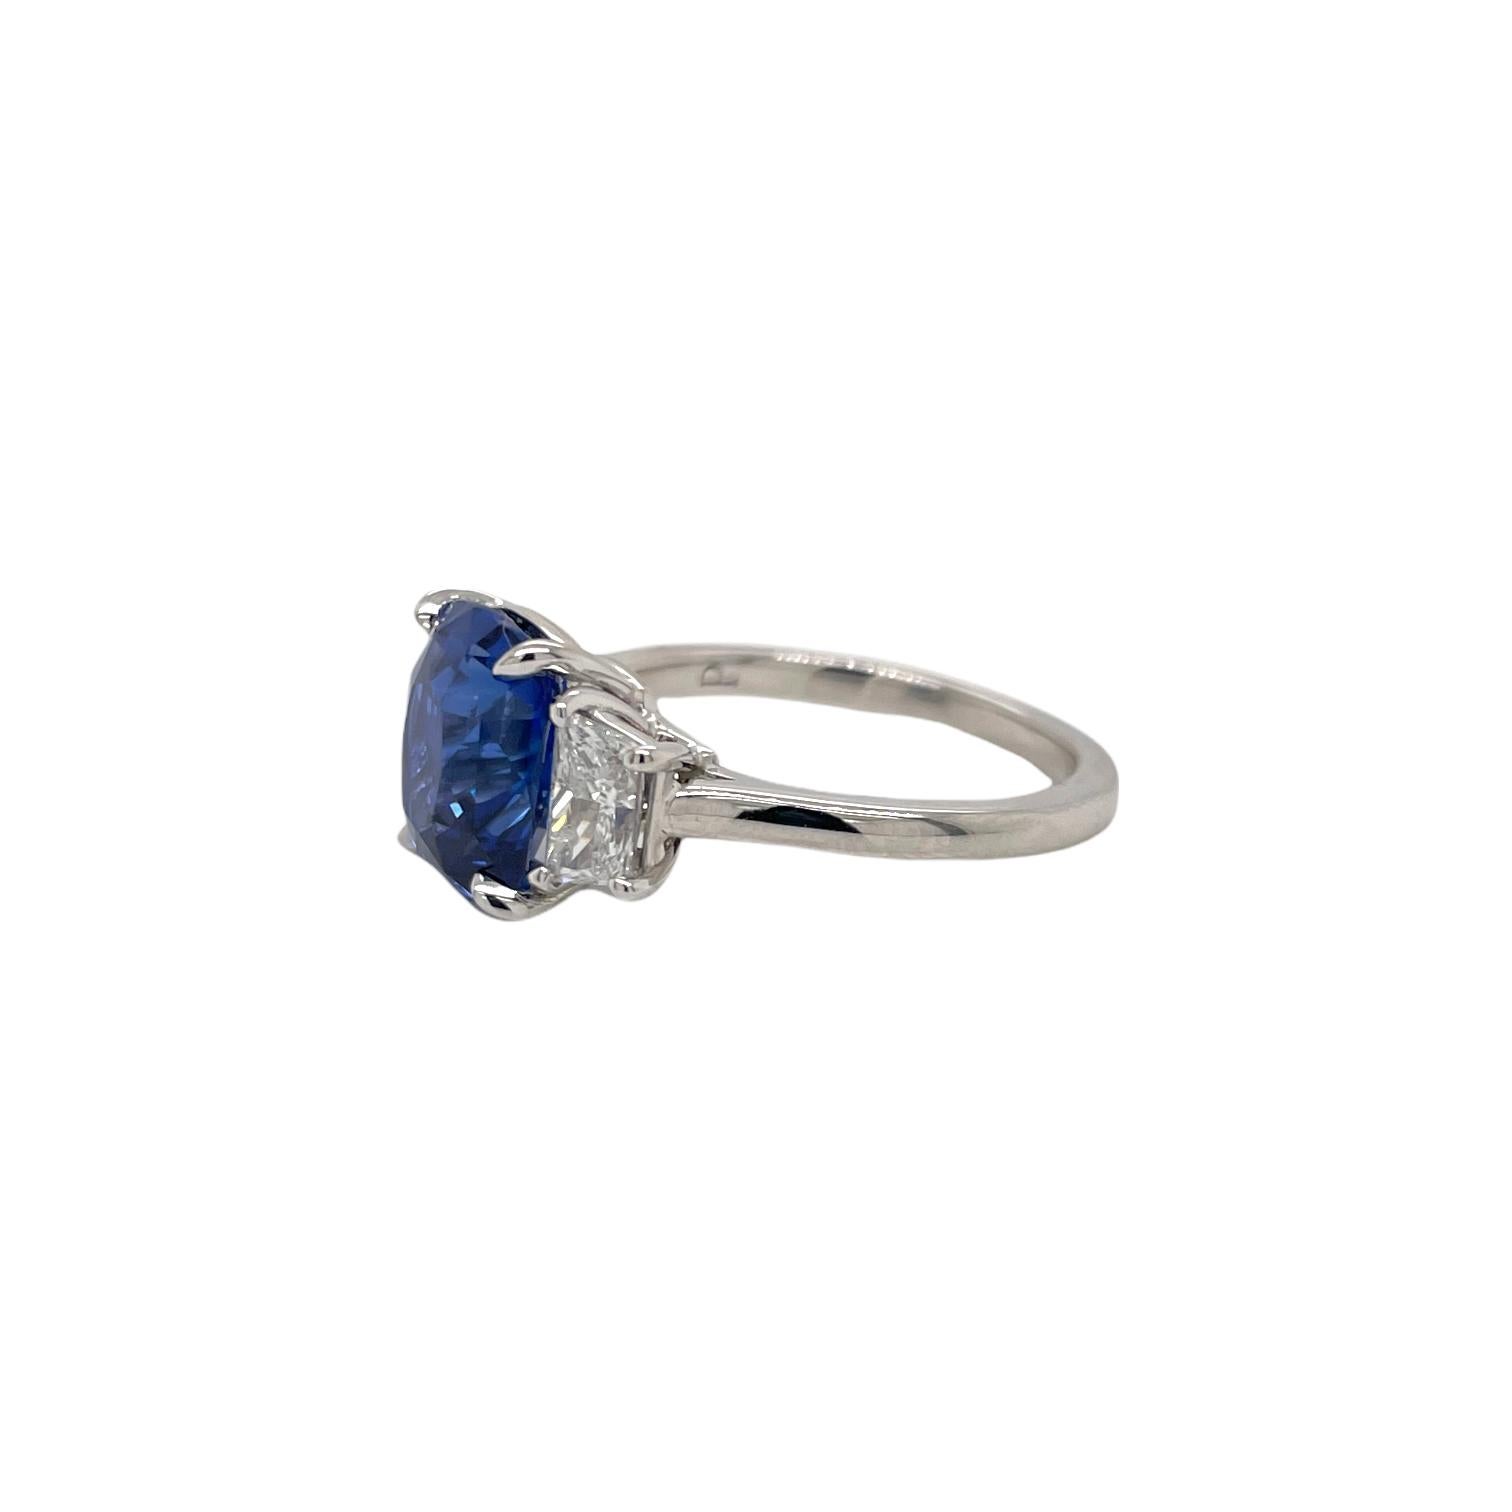 Contemporary Certified Cushion Cut Sapphire & Diamond Three Stone Ring in 18K White Gold